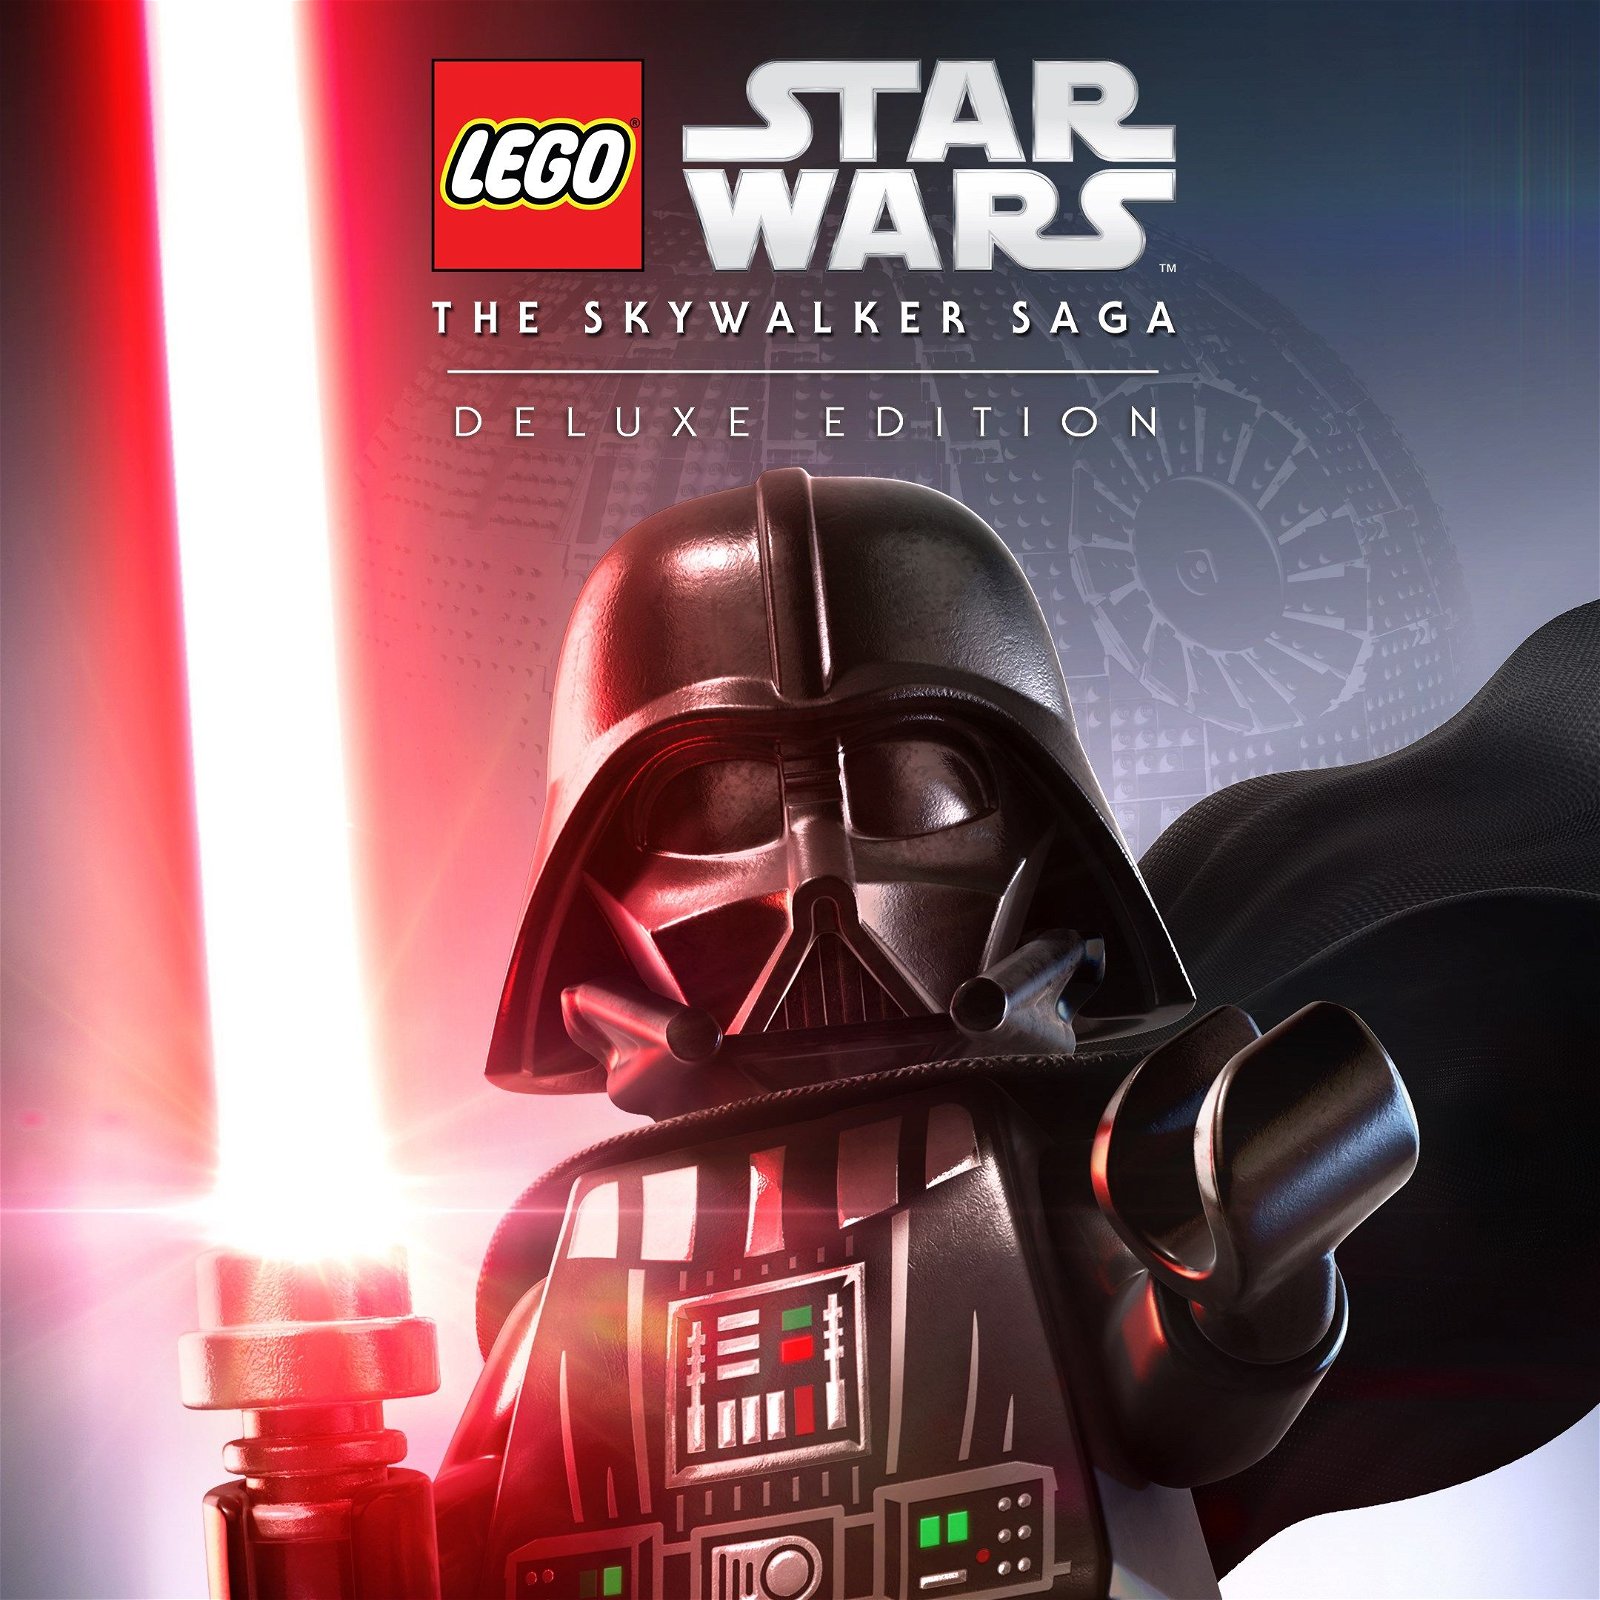 Image of LEGO Star Wars:The Skywalker Saga Deluxe Edition